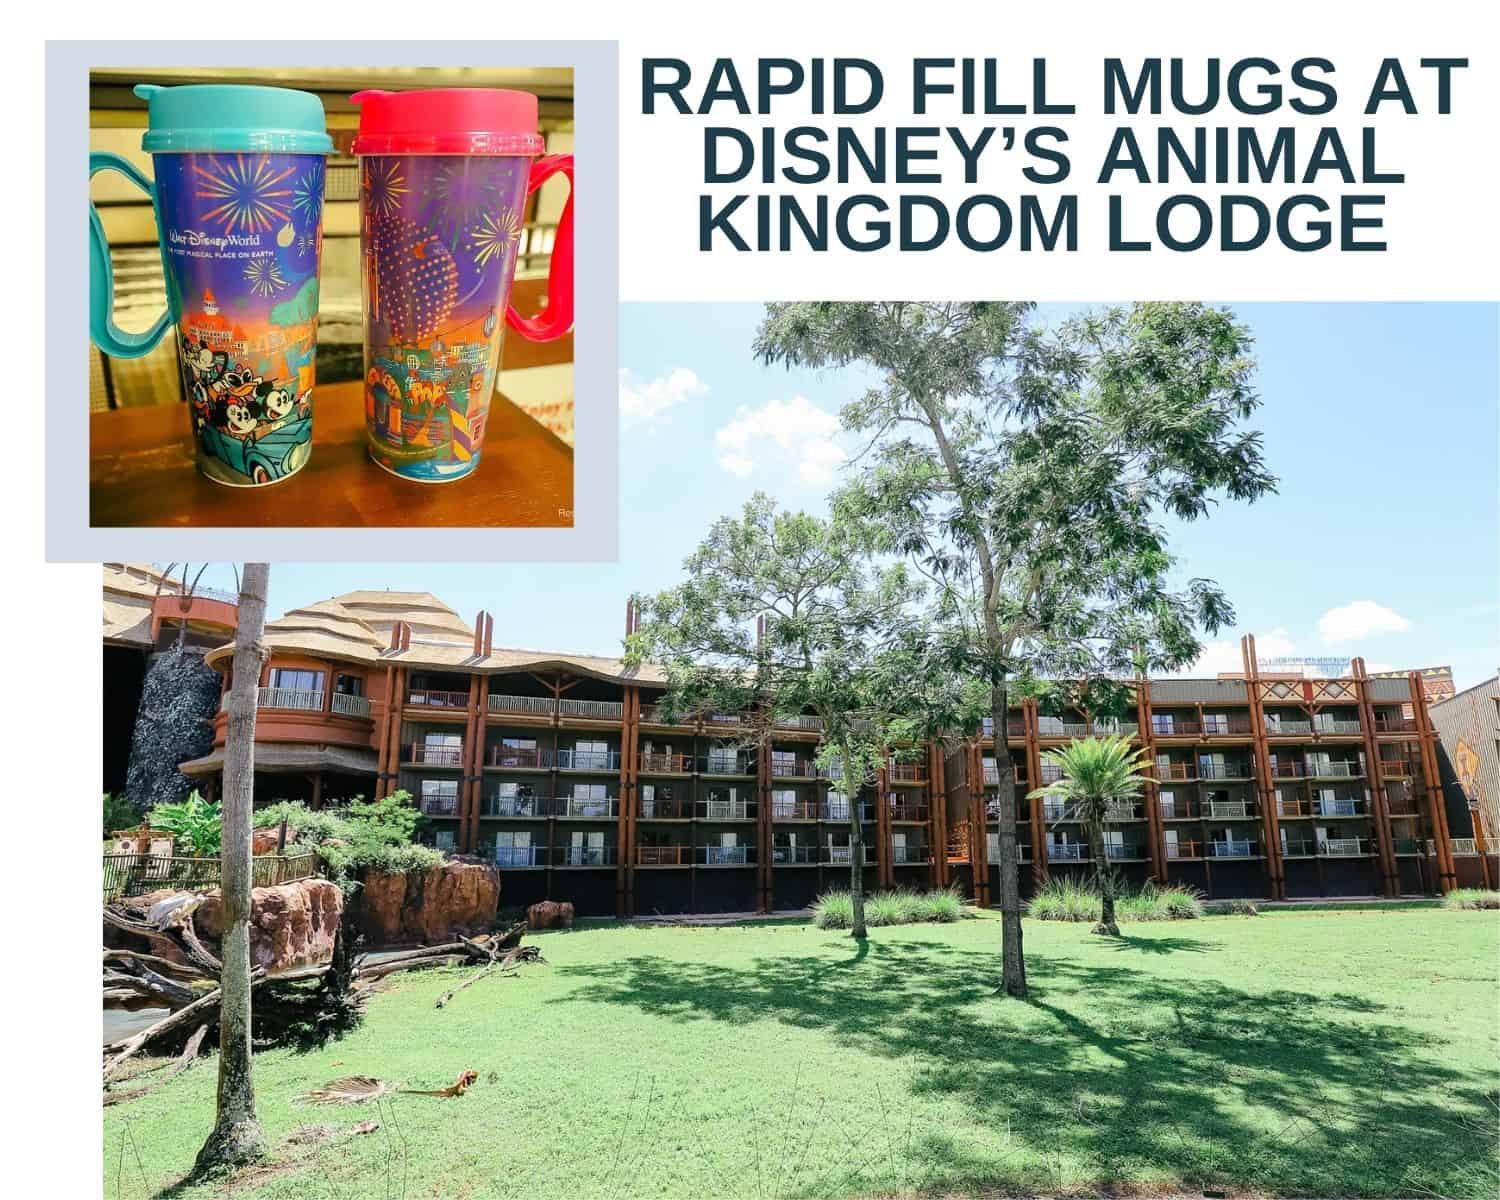 The 3 Places to Refill Rapid Fill Mugs at Disney’s Animal Kingdom Lodge and Kidani Village